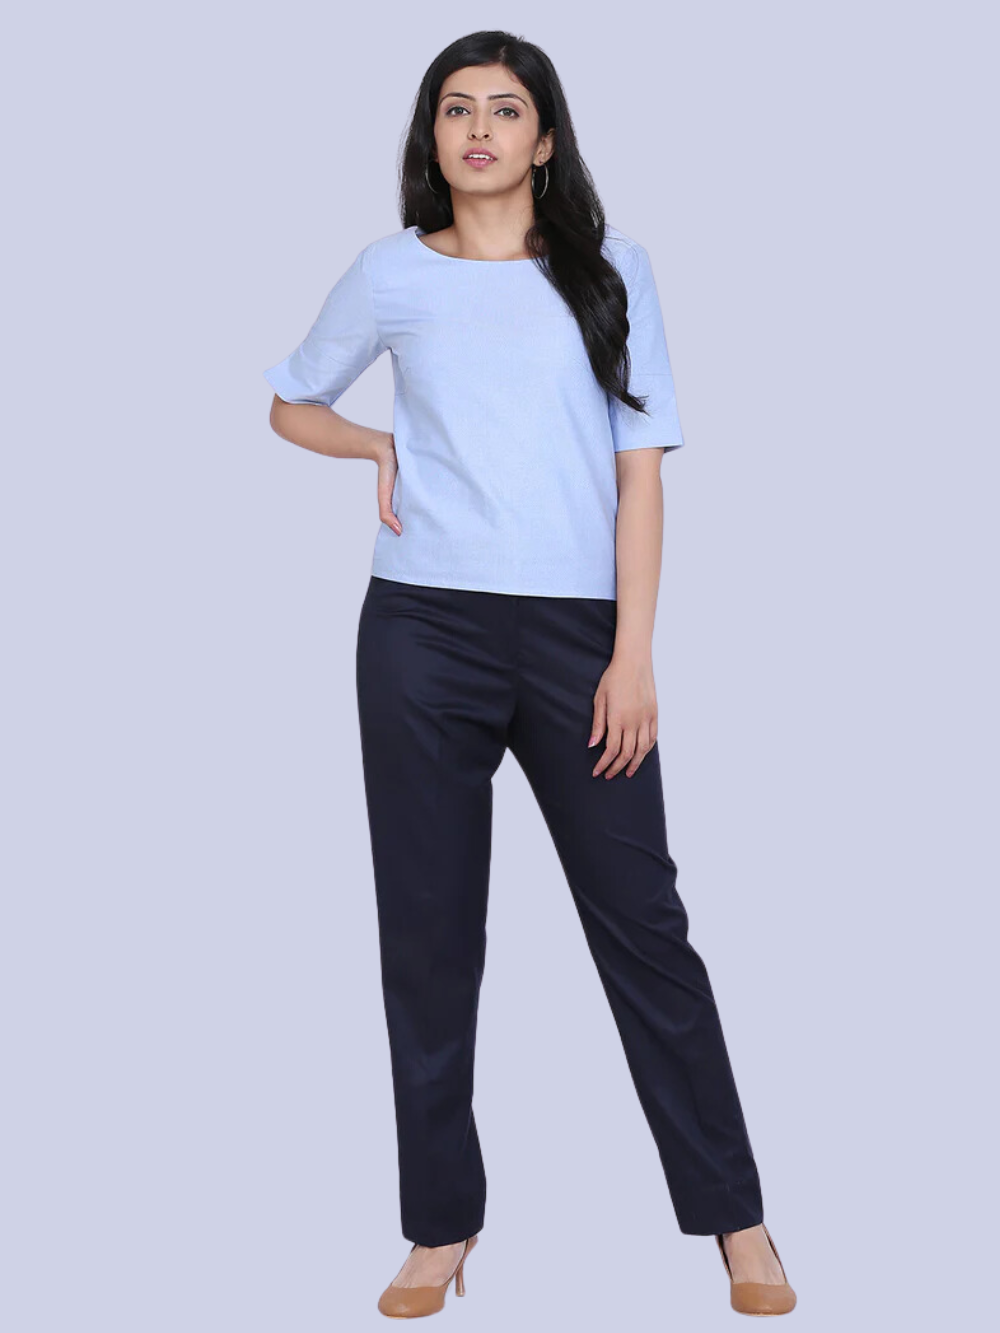 Women's Suits | Explore our New Arrivals | ZARA United States